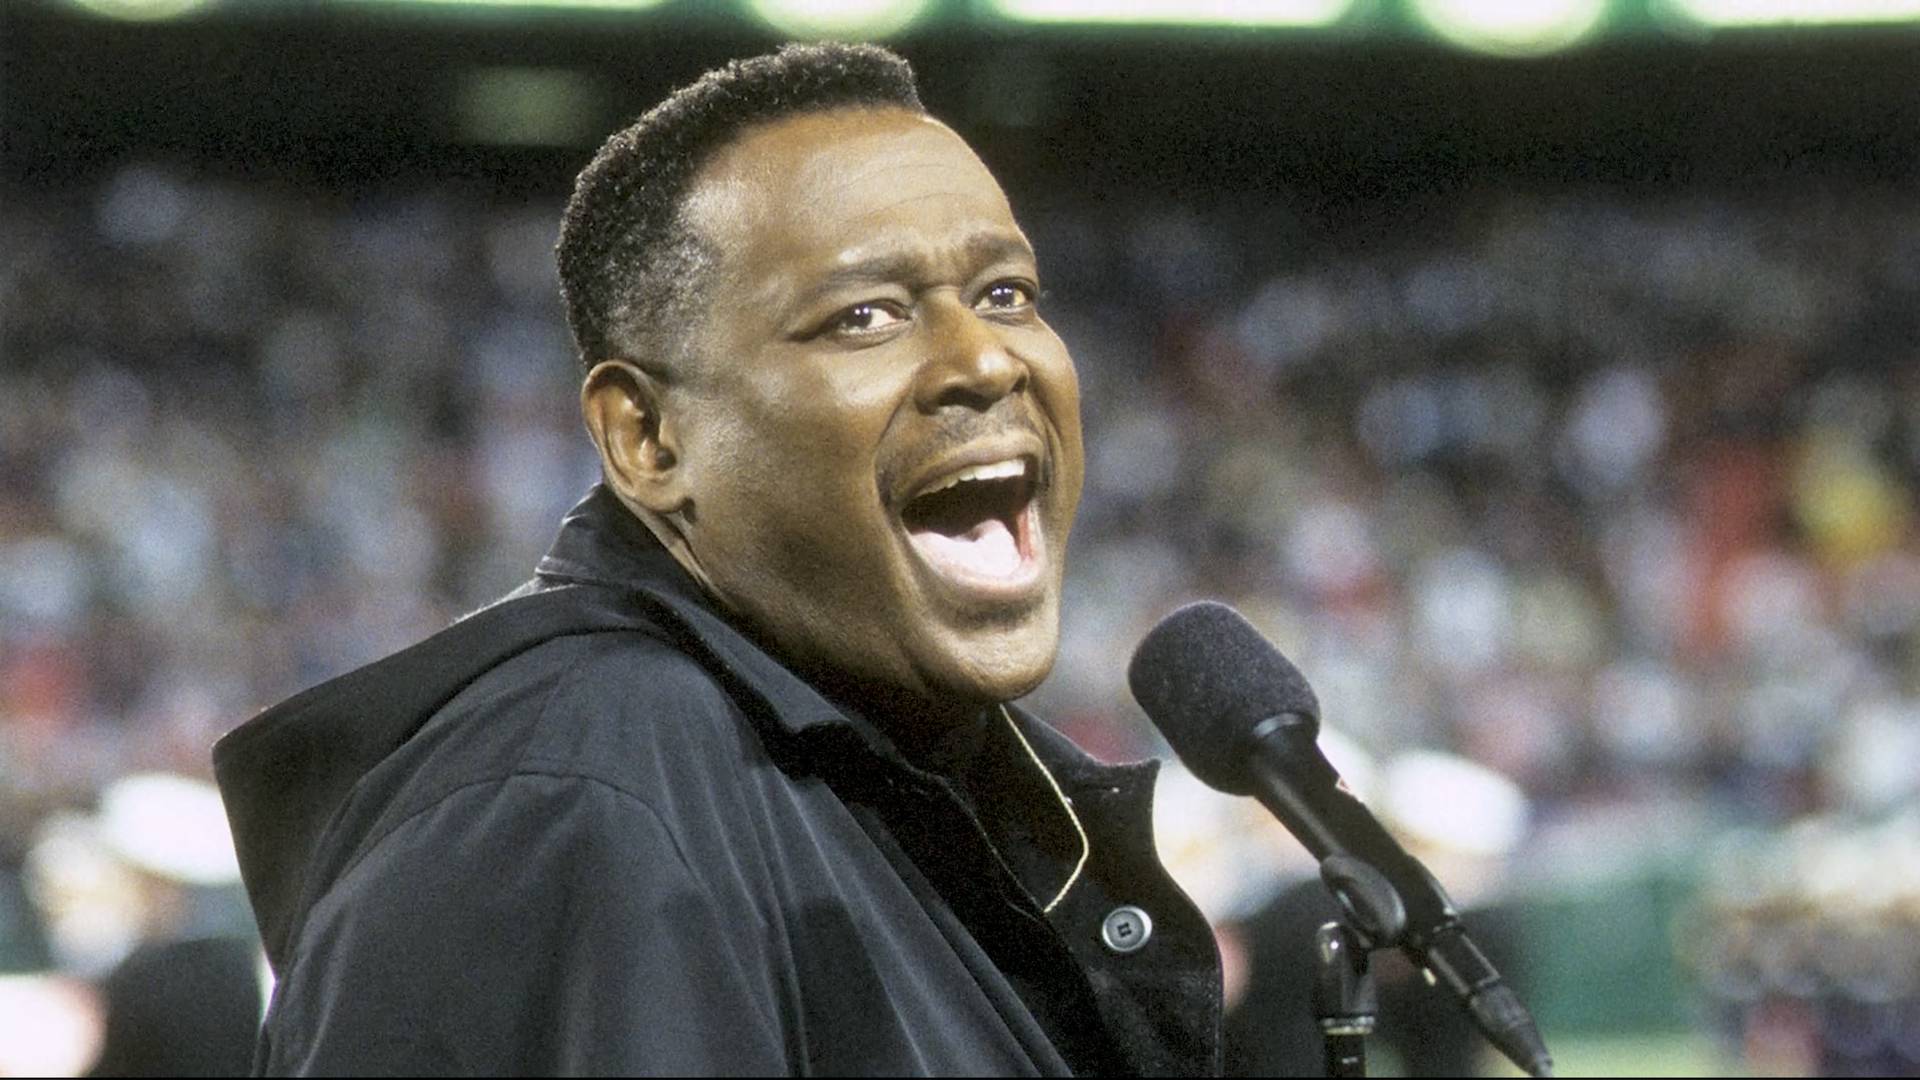 Luther Vandross singing in a black jacket.